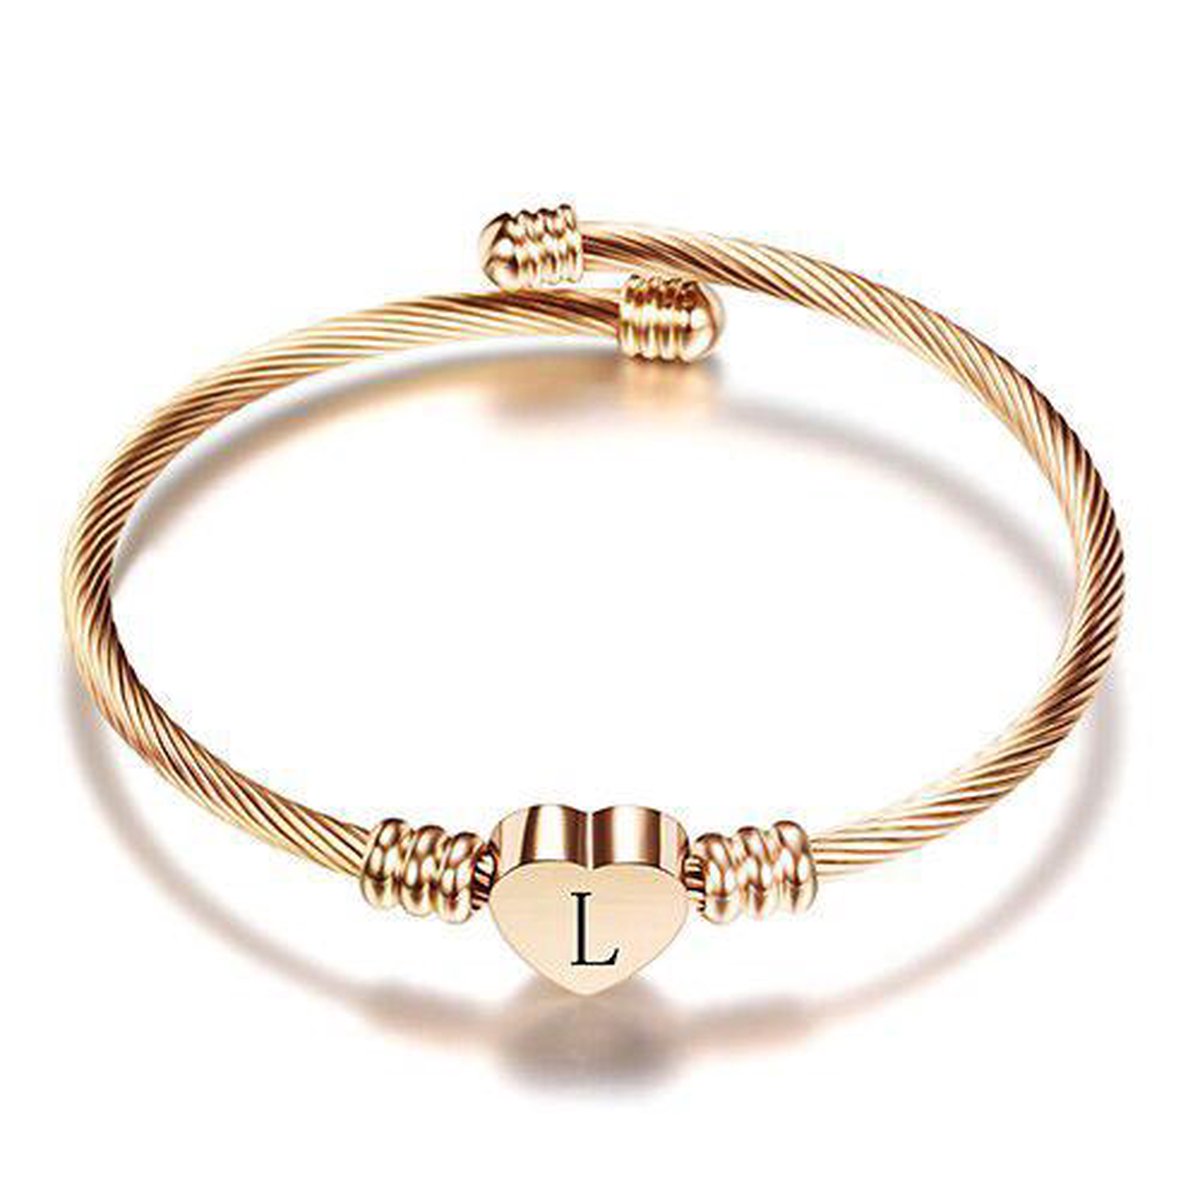 24/7 Jewelry Collection Hart Armband met Letter - Bangle - Initiaal - Rosé Goudkleurig - Letter L - Amodi